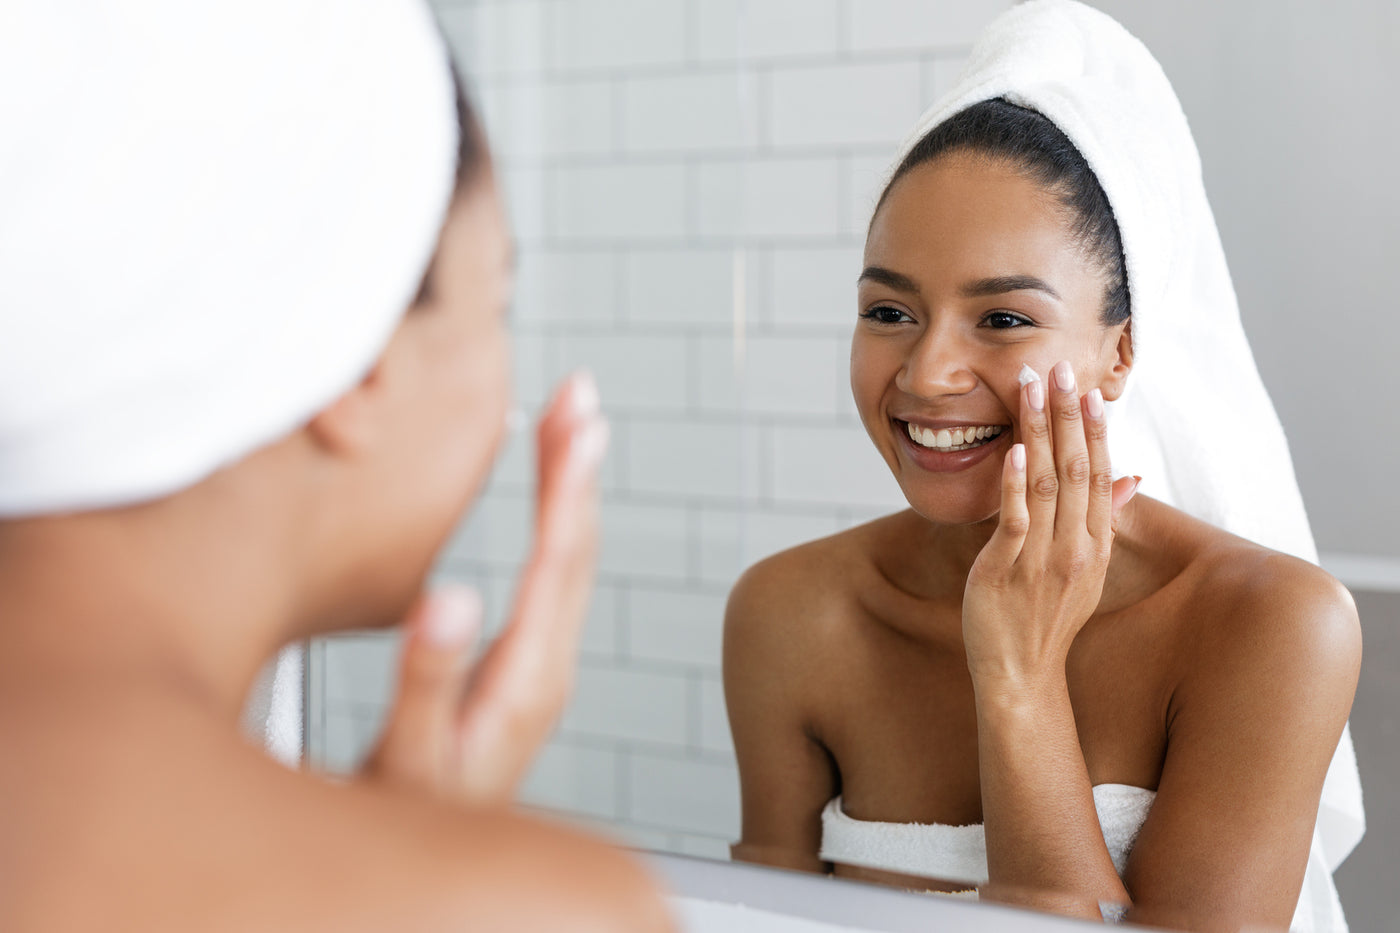 7 Tips For Getting Rid of Uneven Skin Tone